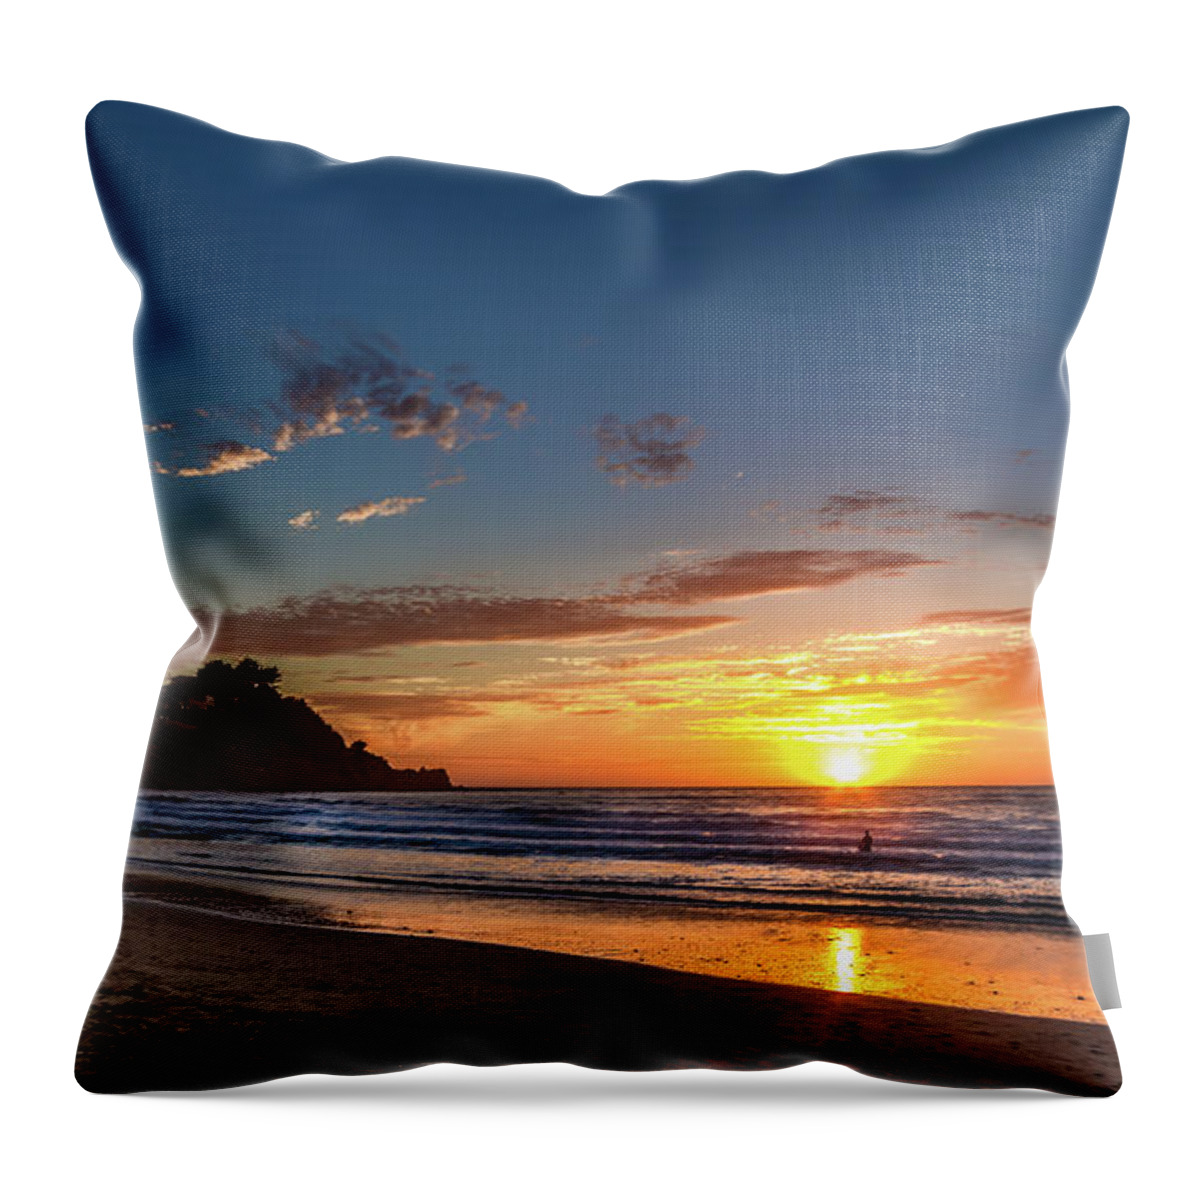 Sunset Throw Pillow featuring the photograph Pacifica Sunset by Bill Gallagher